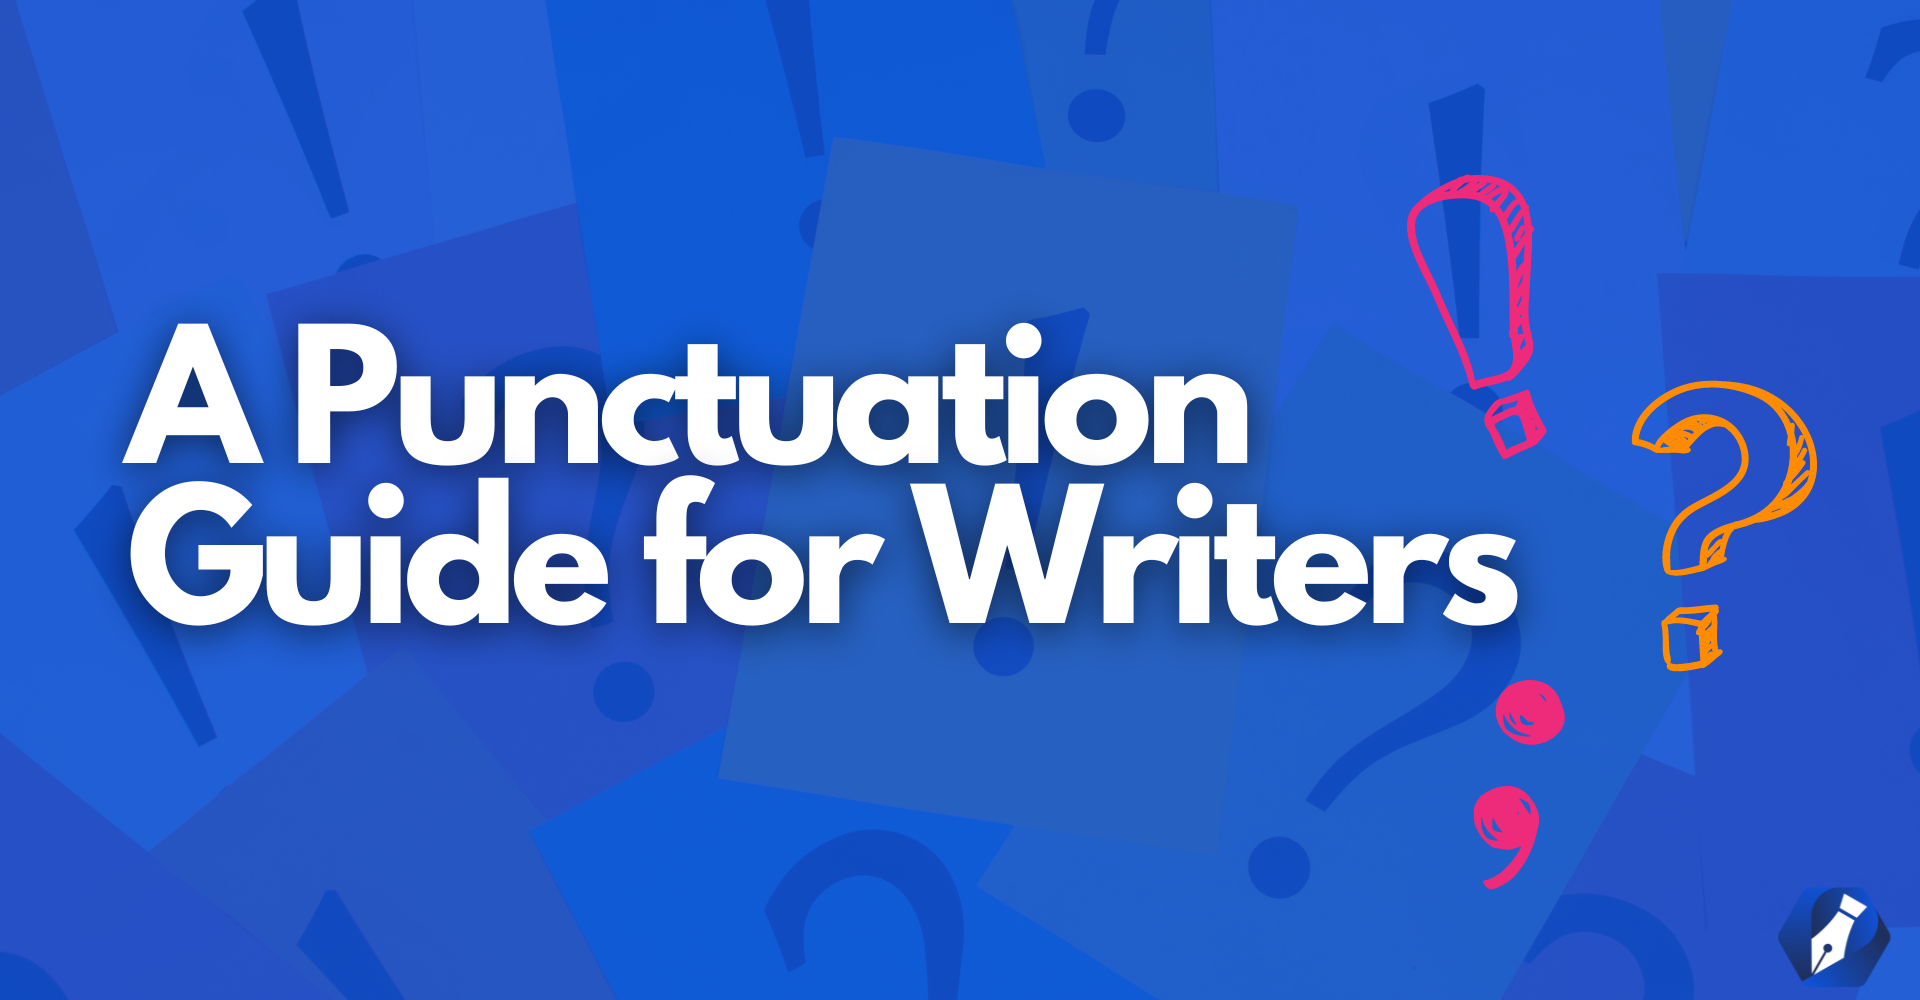 a-punctuation-guide-for-writers-em-dashes-semicolons-oxford-commas-9-more-all-things